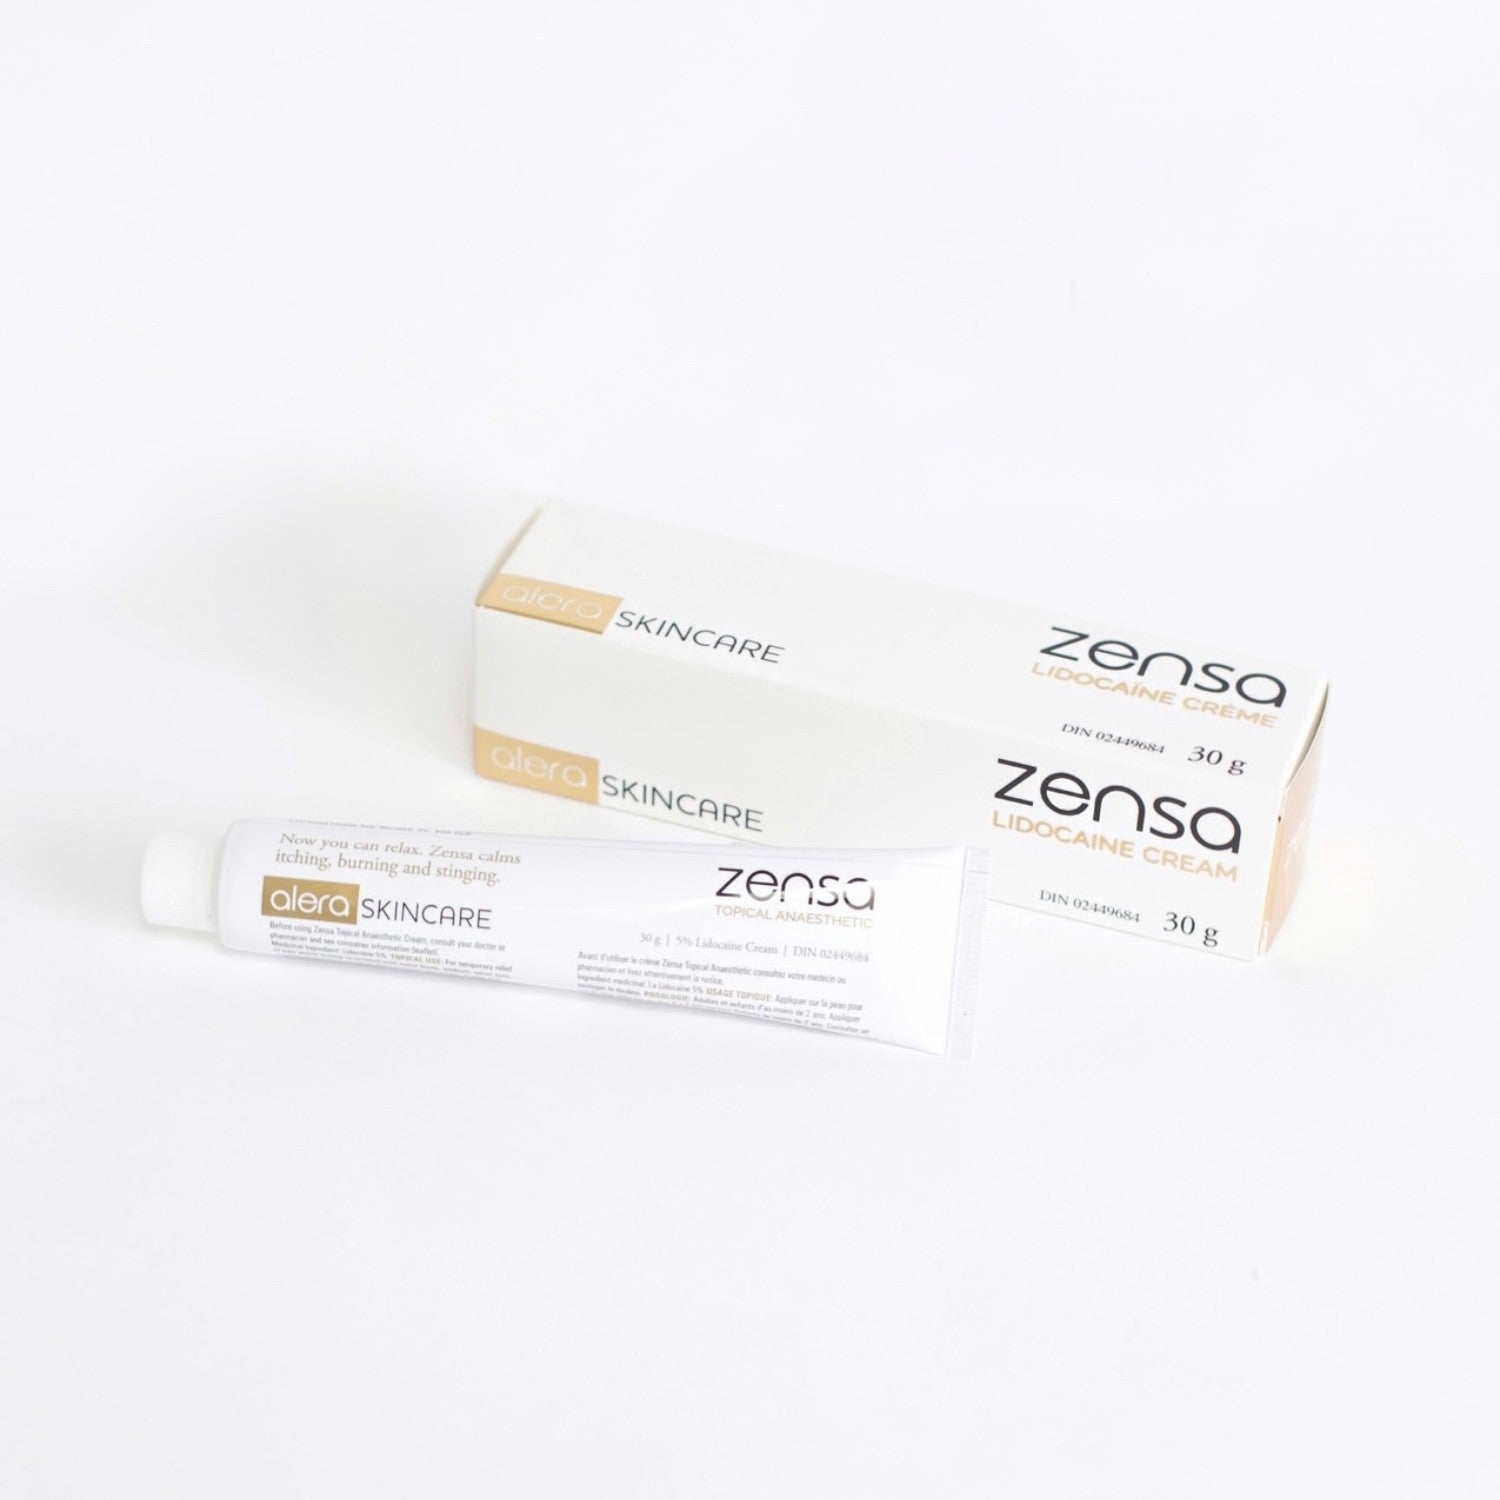 zensa numbing cream, zensa topical anesthetic, topical anesthetic numbing cream, topical anesthetic for permanent makeup tattoo, numbing cream for tattoo with new packaging